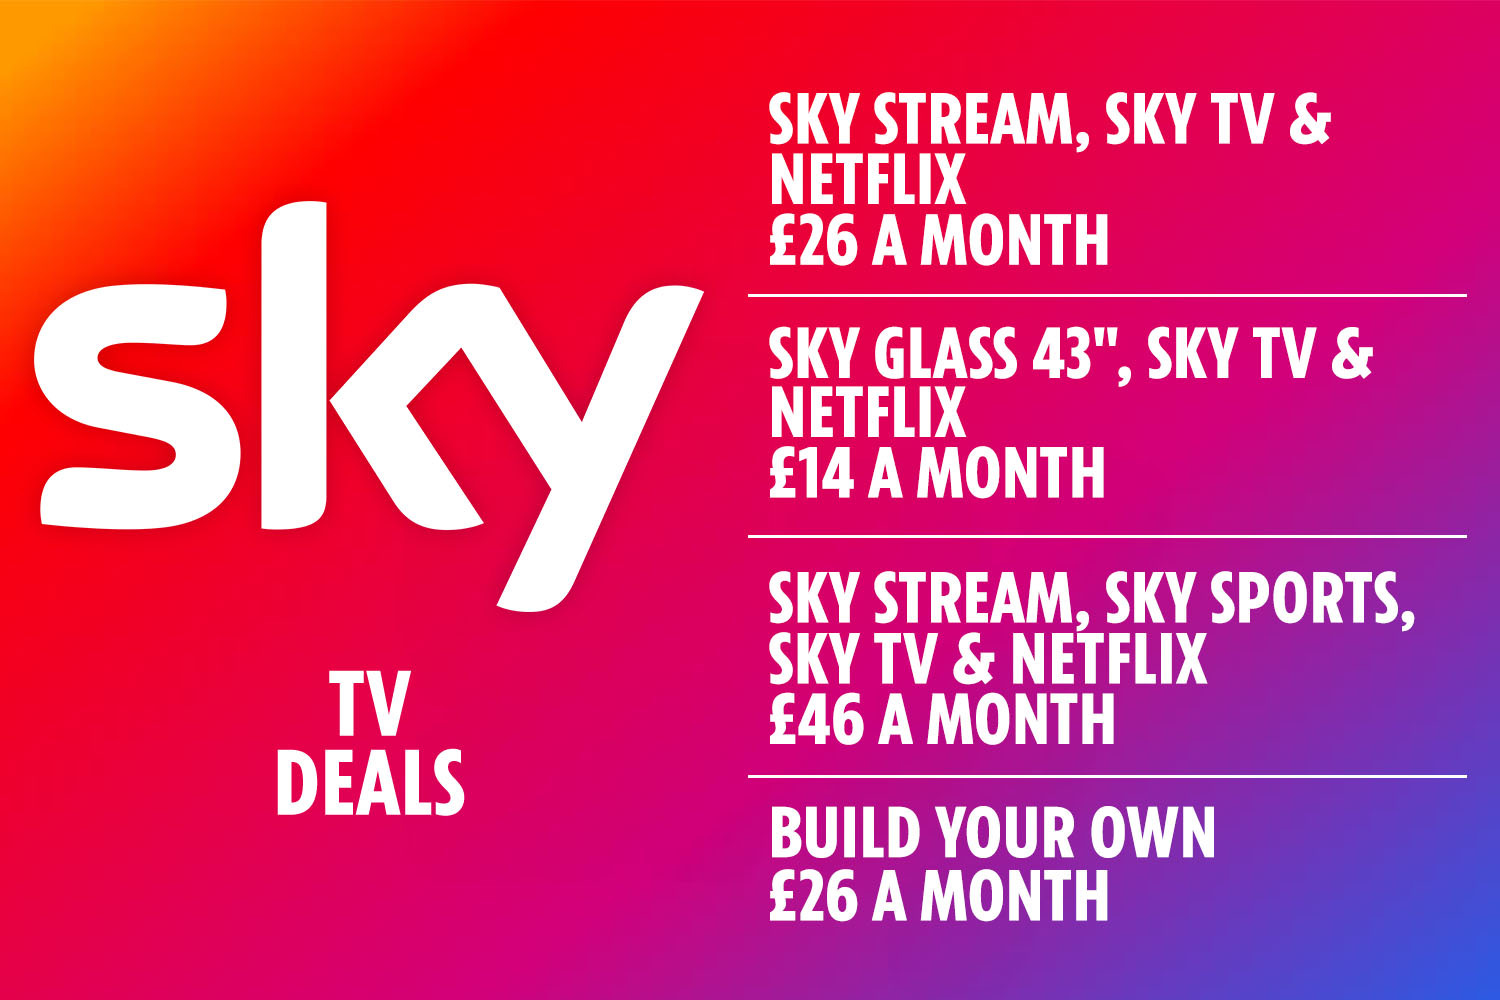 Sky entertainment stream deals could see you trial a bundle for free for one month